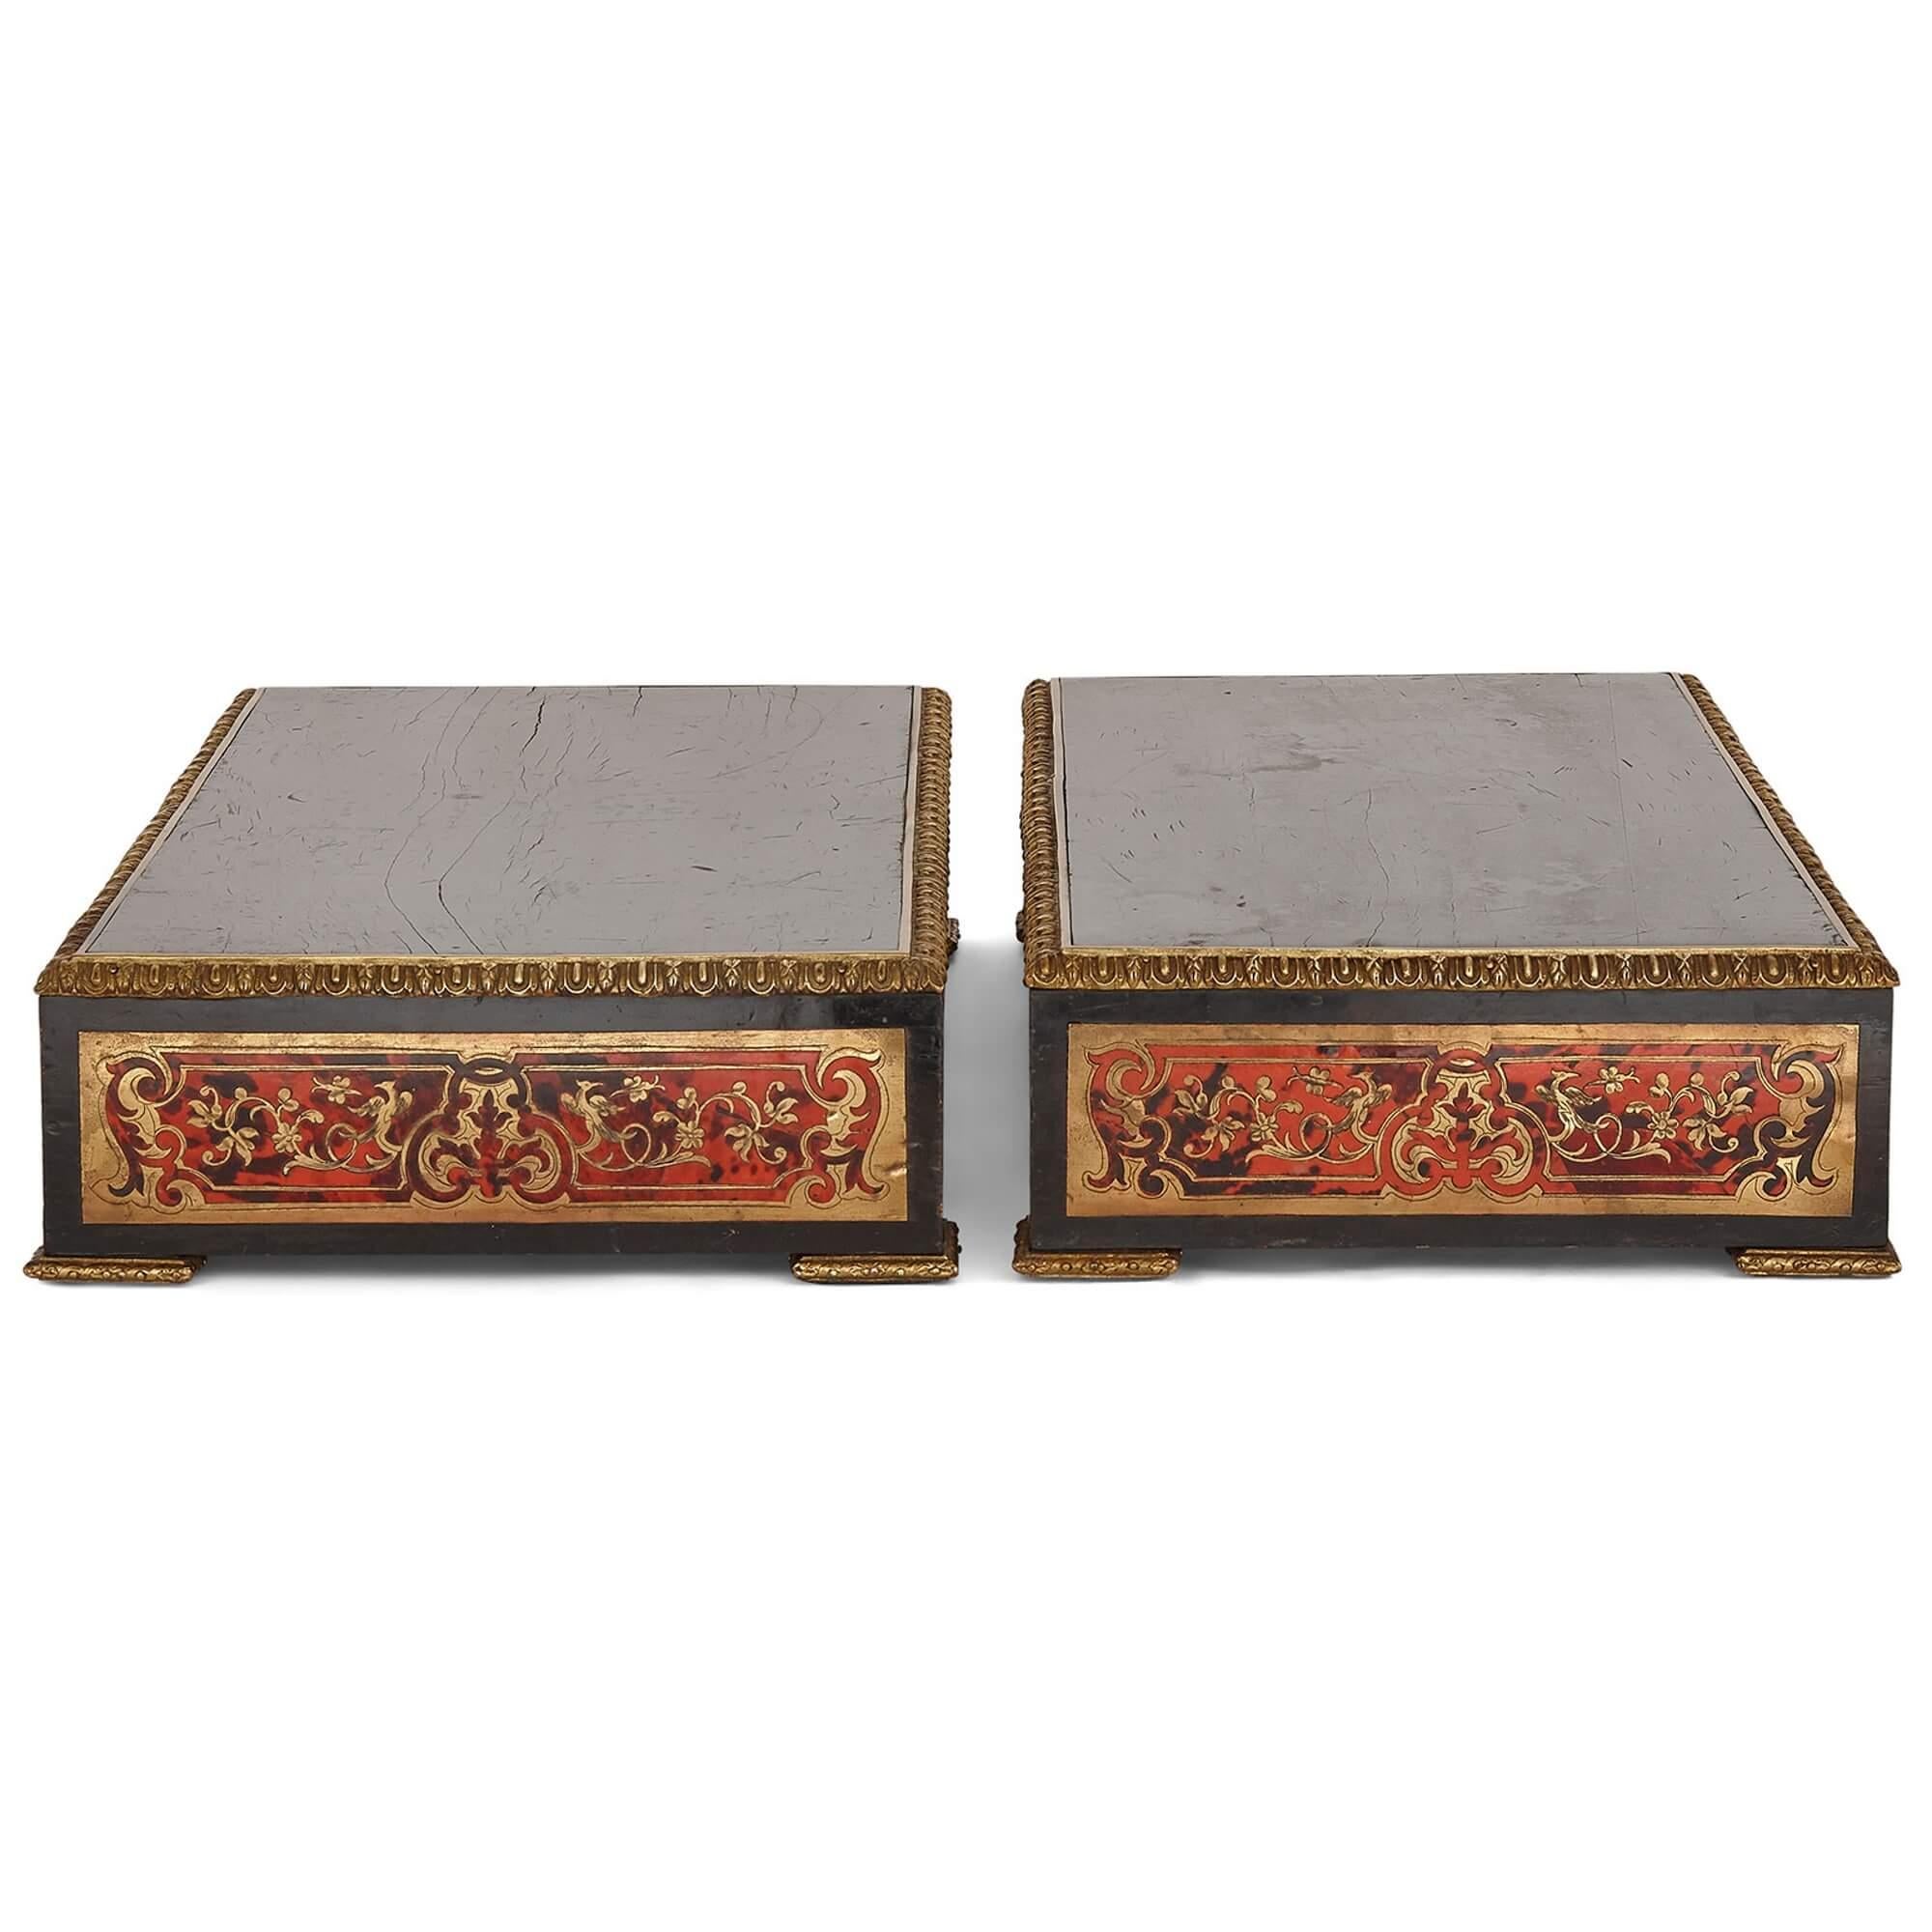 Pair of antique Boullework brass marquetry stands
French, 19th Century
Measures: height 13cm, width 63cm, depth 34cm

The stands in this pair are crafted from ebonised wood mounted with gilt bronze. The sides of each stand feature panels of